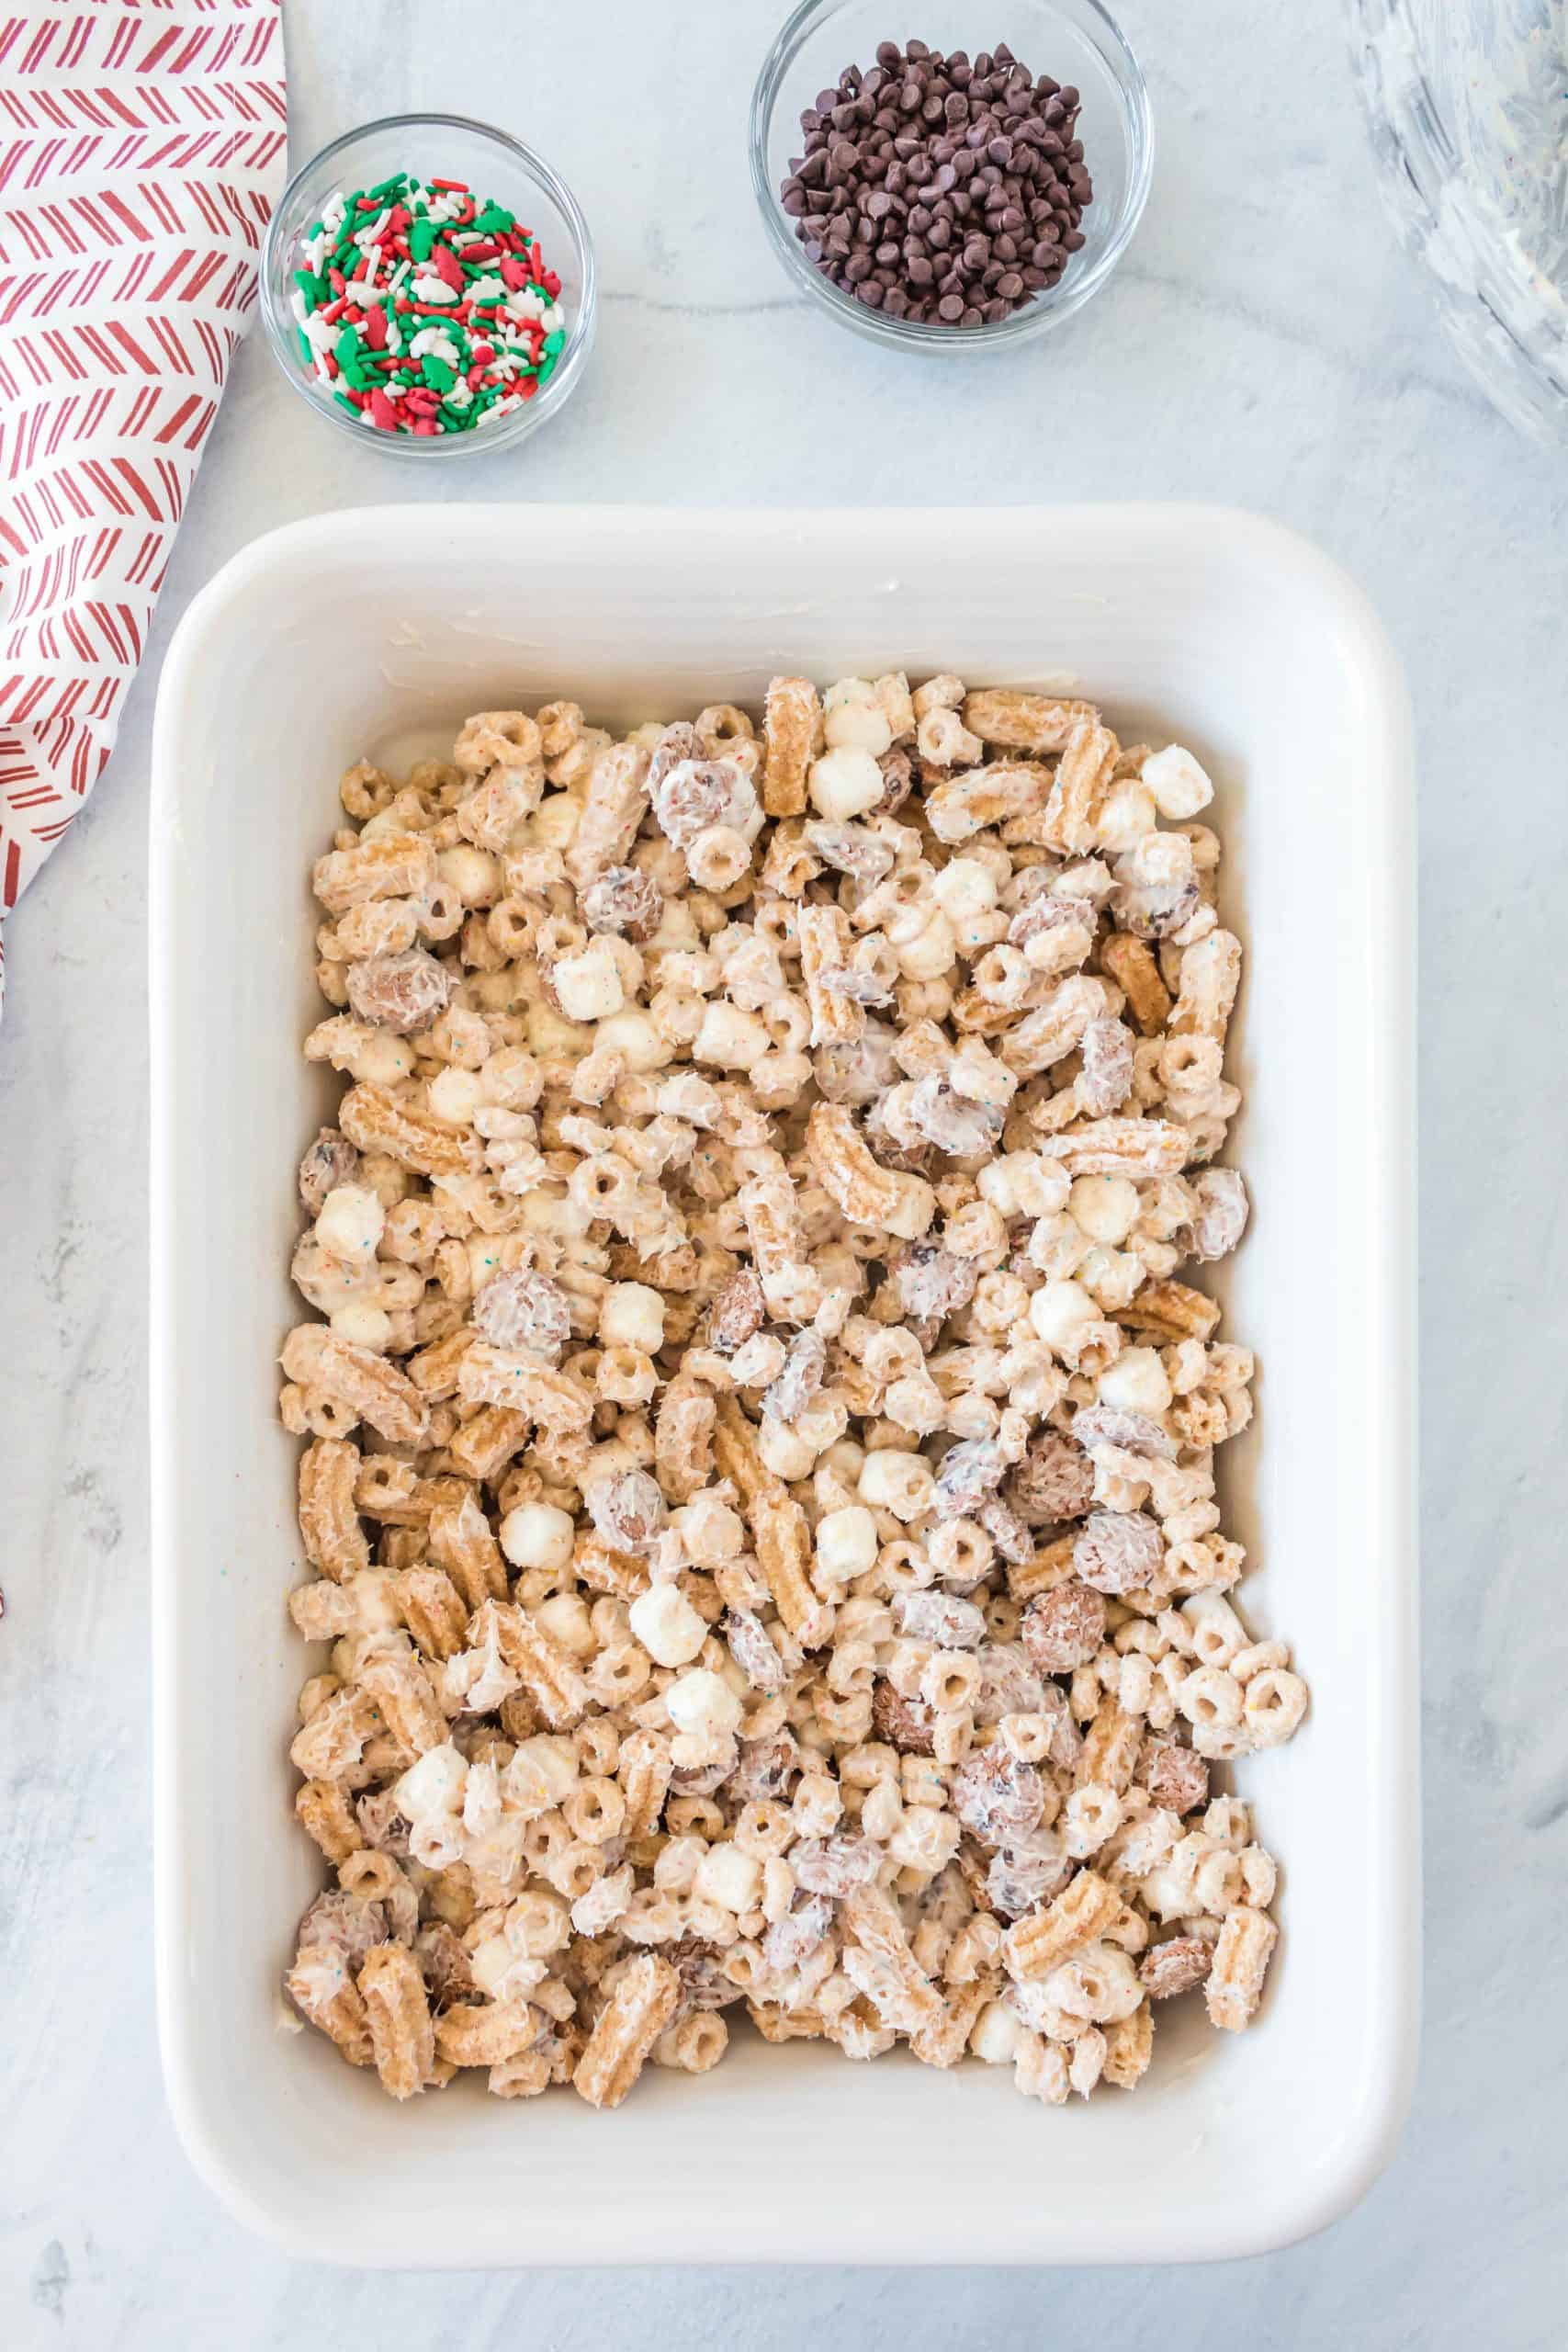 candy coated cereal spread into a greased baking dish.